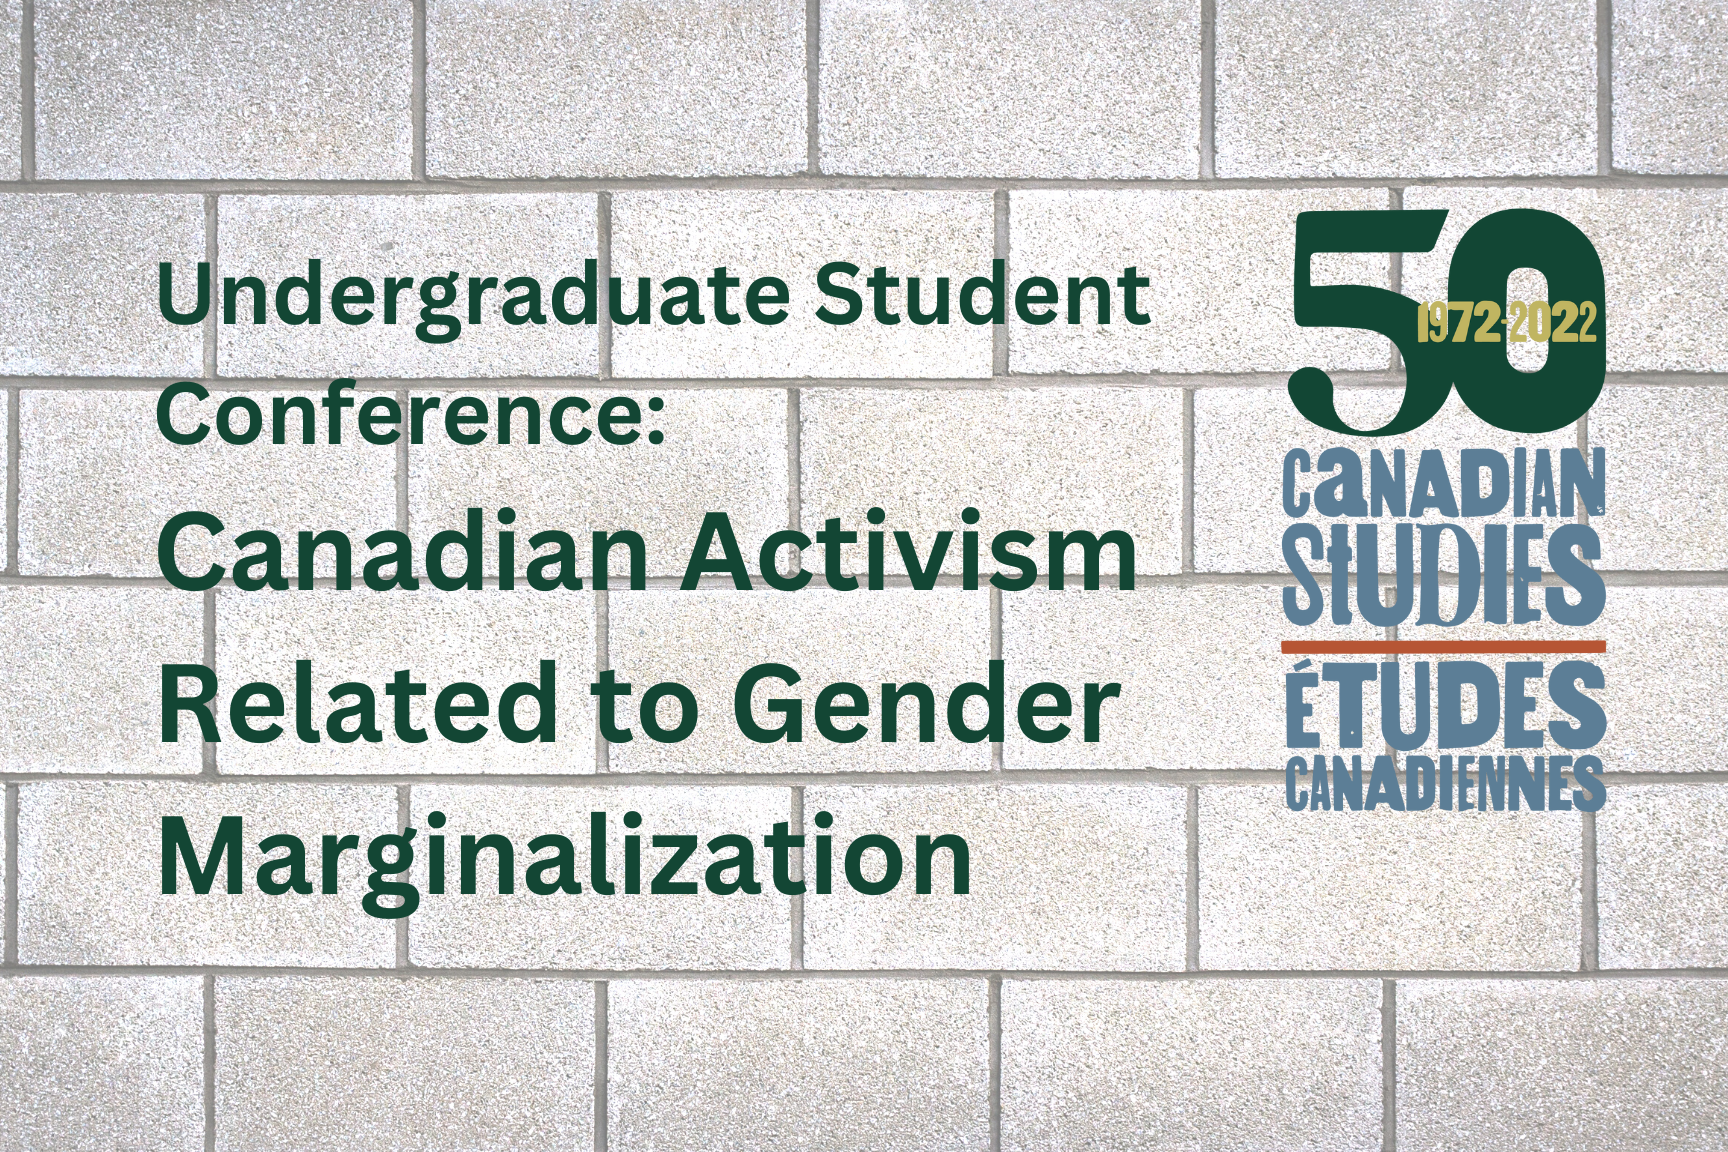 grey brick wall with words Undergraduate Student Conference:  Canadian Activism Related to Gender Marginalization, along with CAST 50th logo
